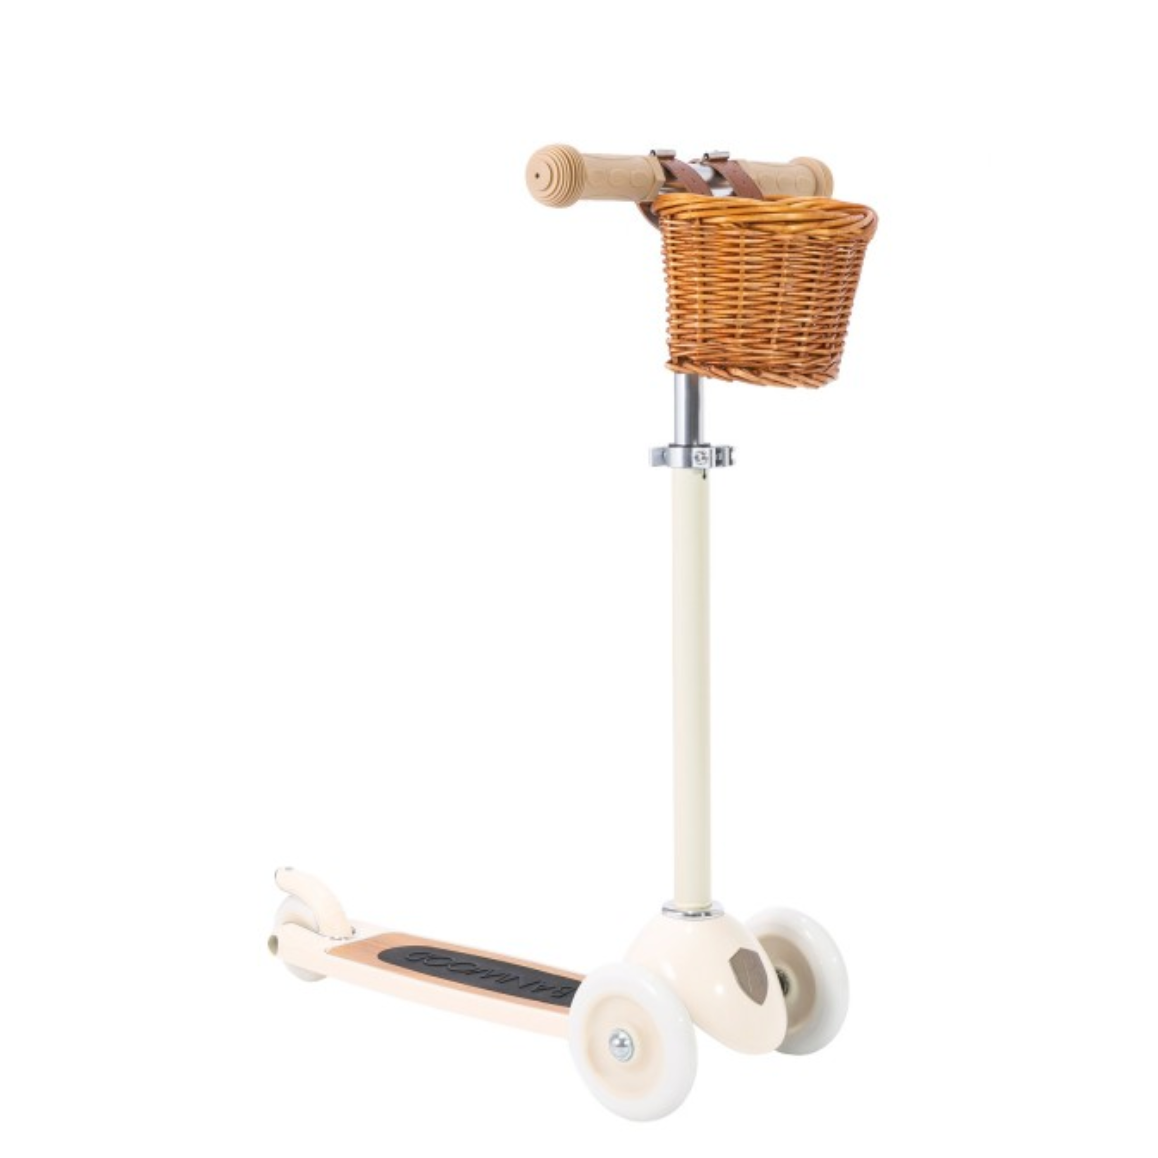 Banwood Scooter - Multiple Colors Avalable